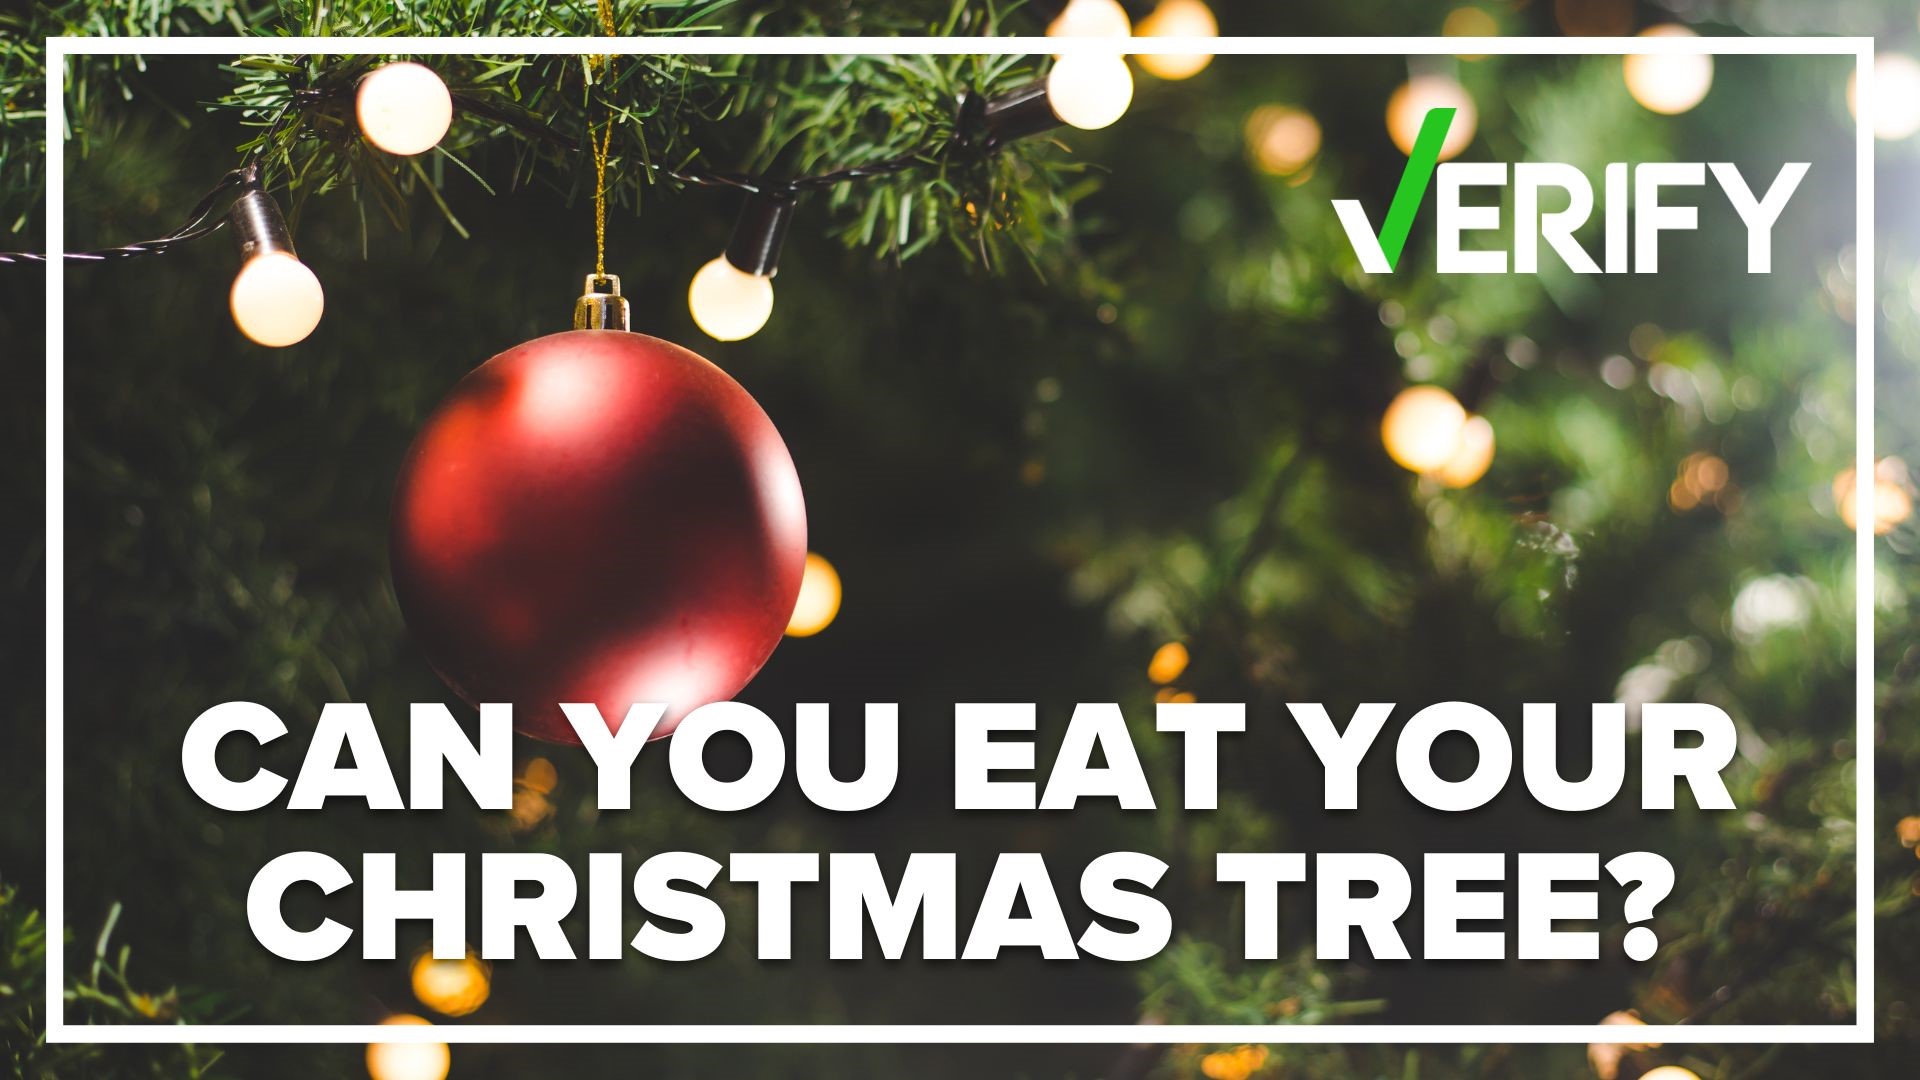 While most folks who got a real Christmas tree will throw it out, one article making the rounds online suggests eating it. But should you actually do that?